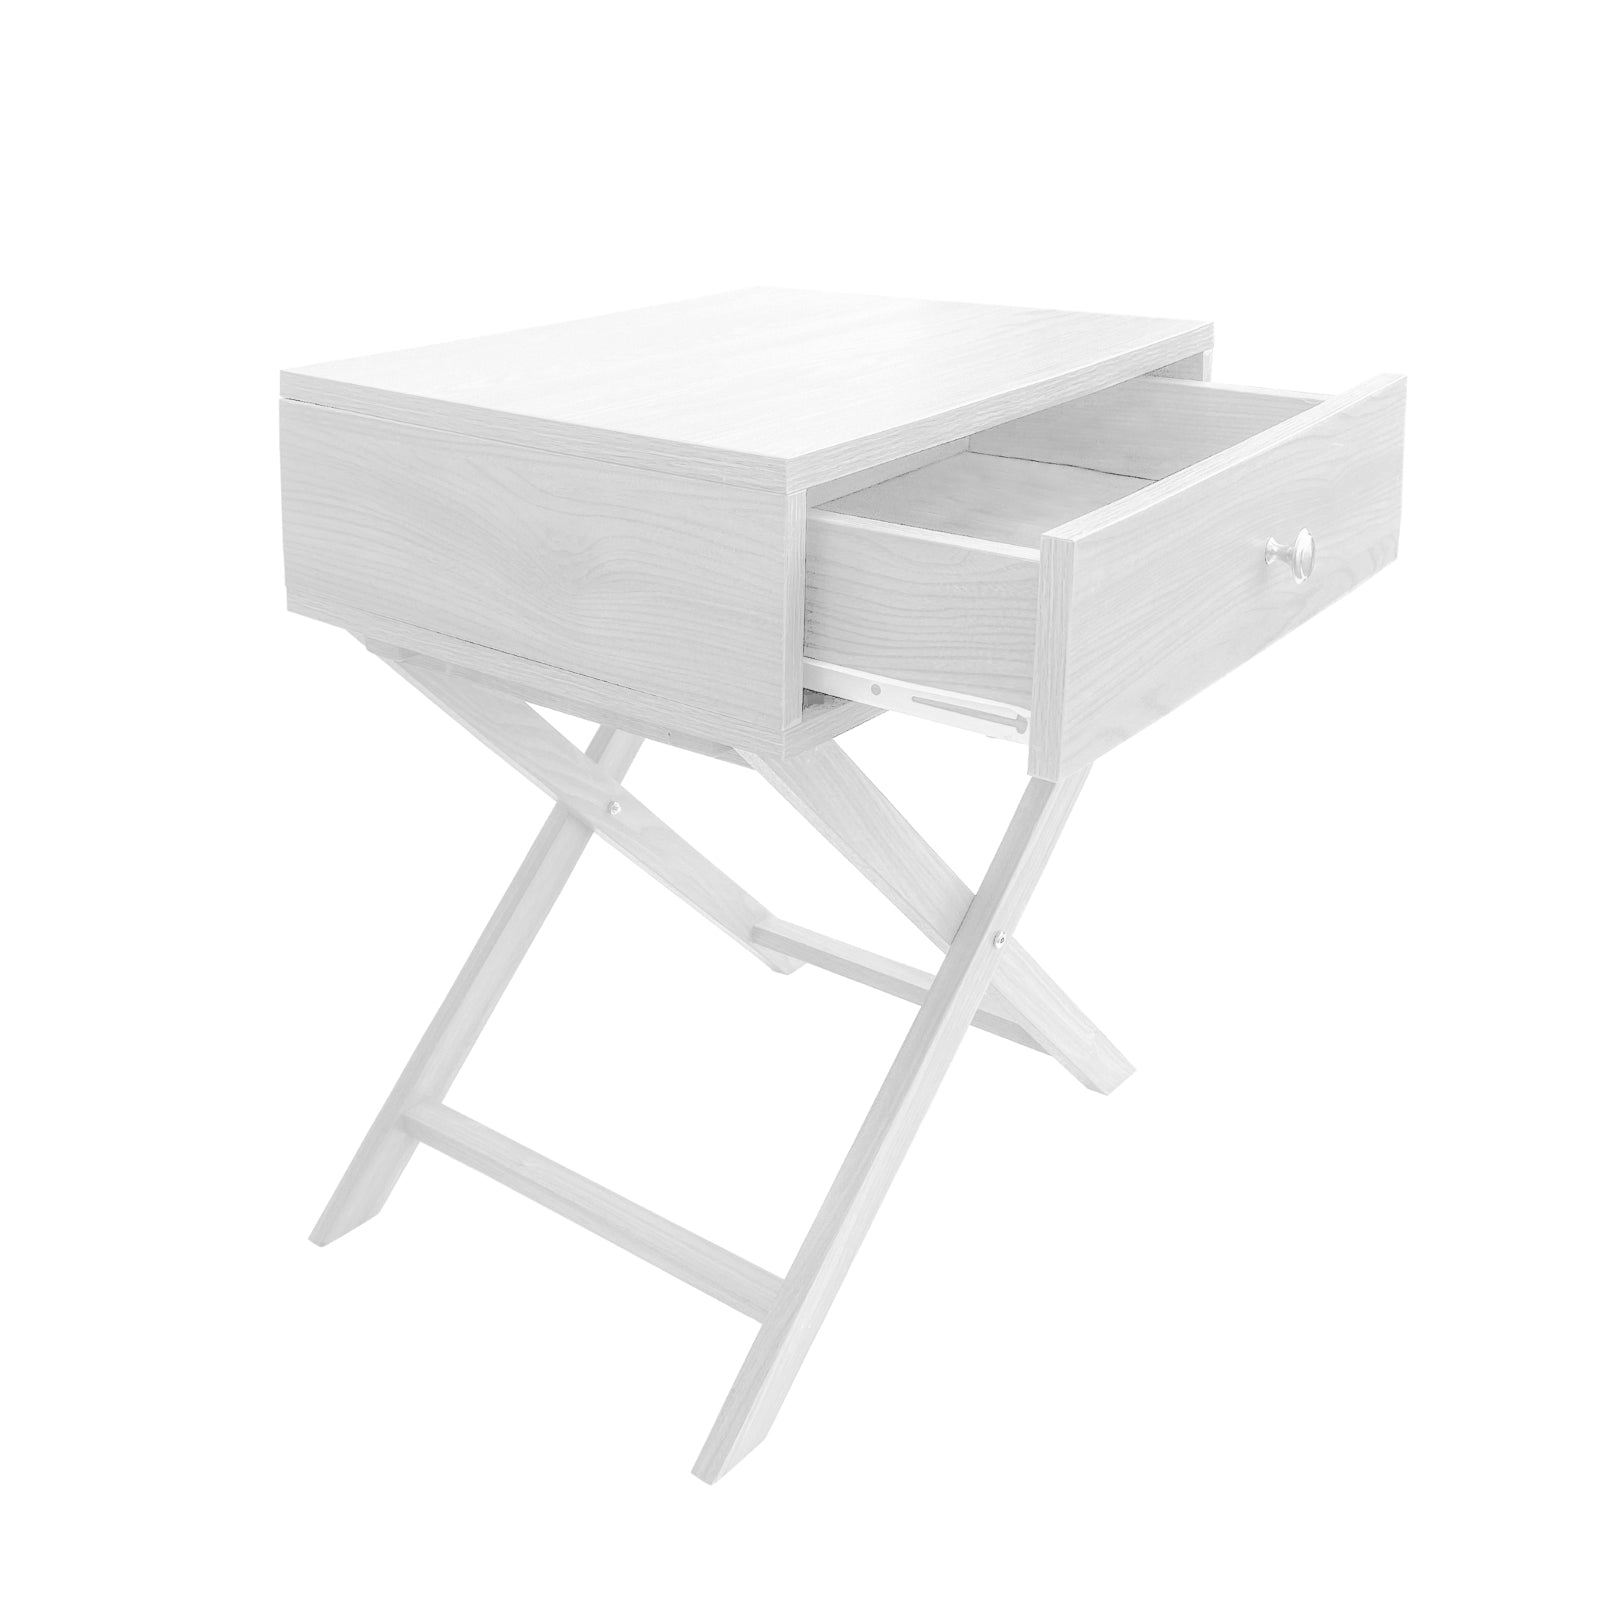 Milano Decor Bedside Table Surry Hills White Storage Cabinet Bedroom - Two Pack - White